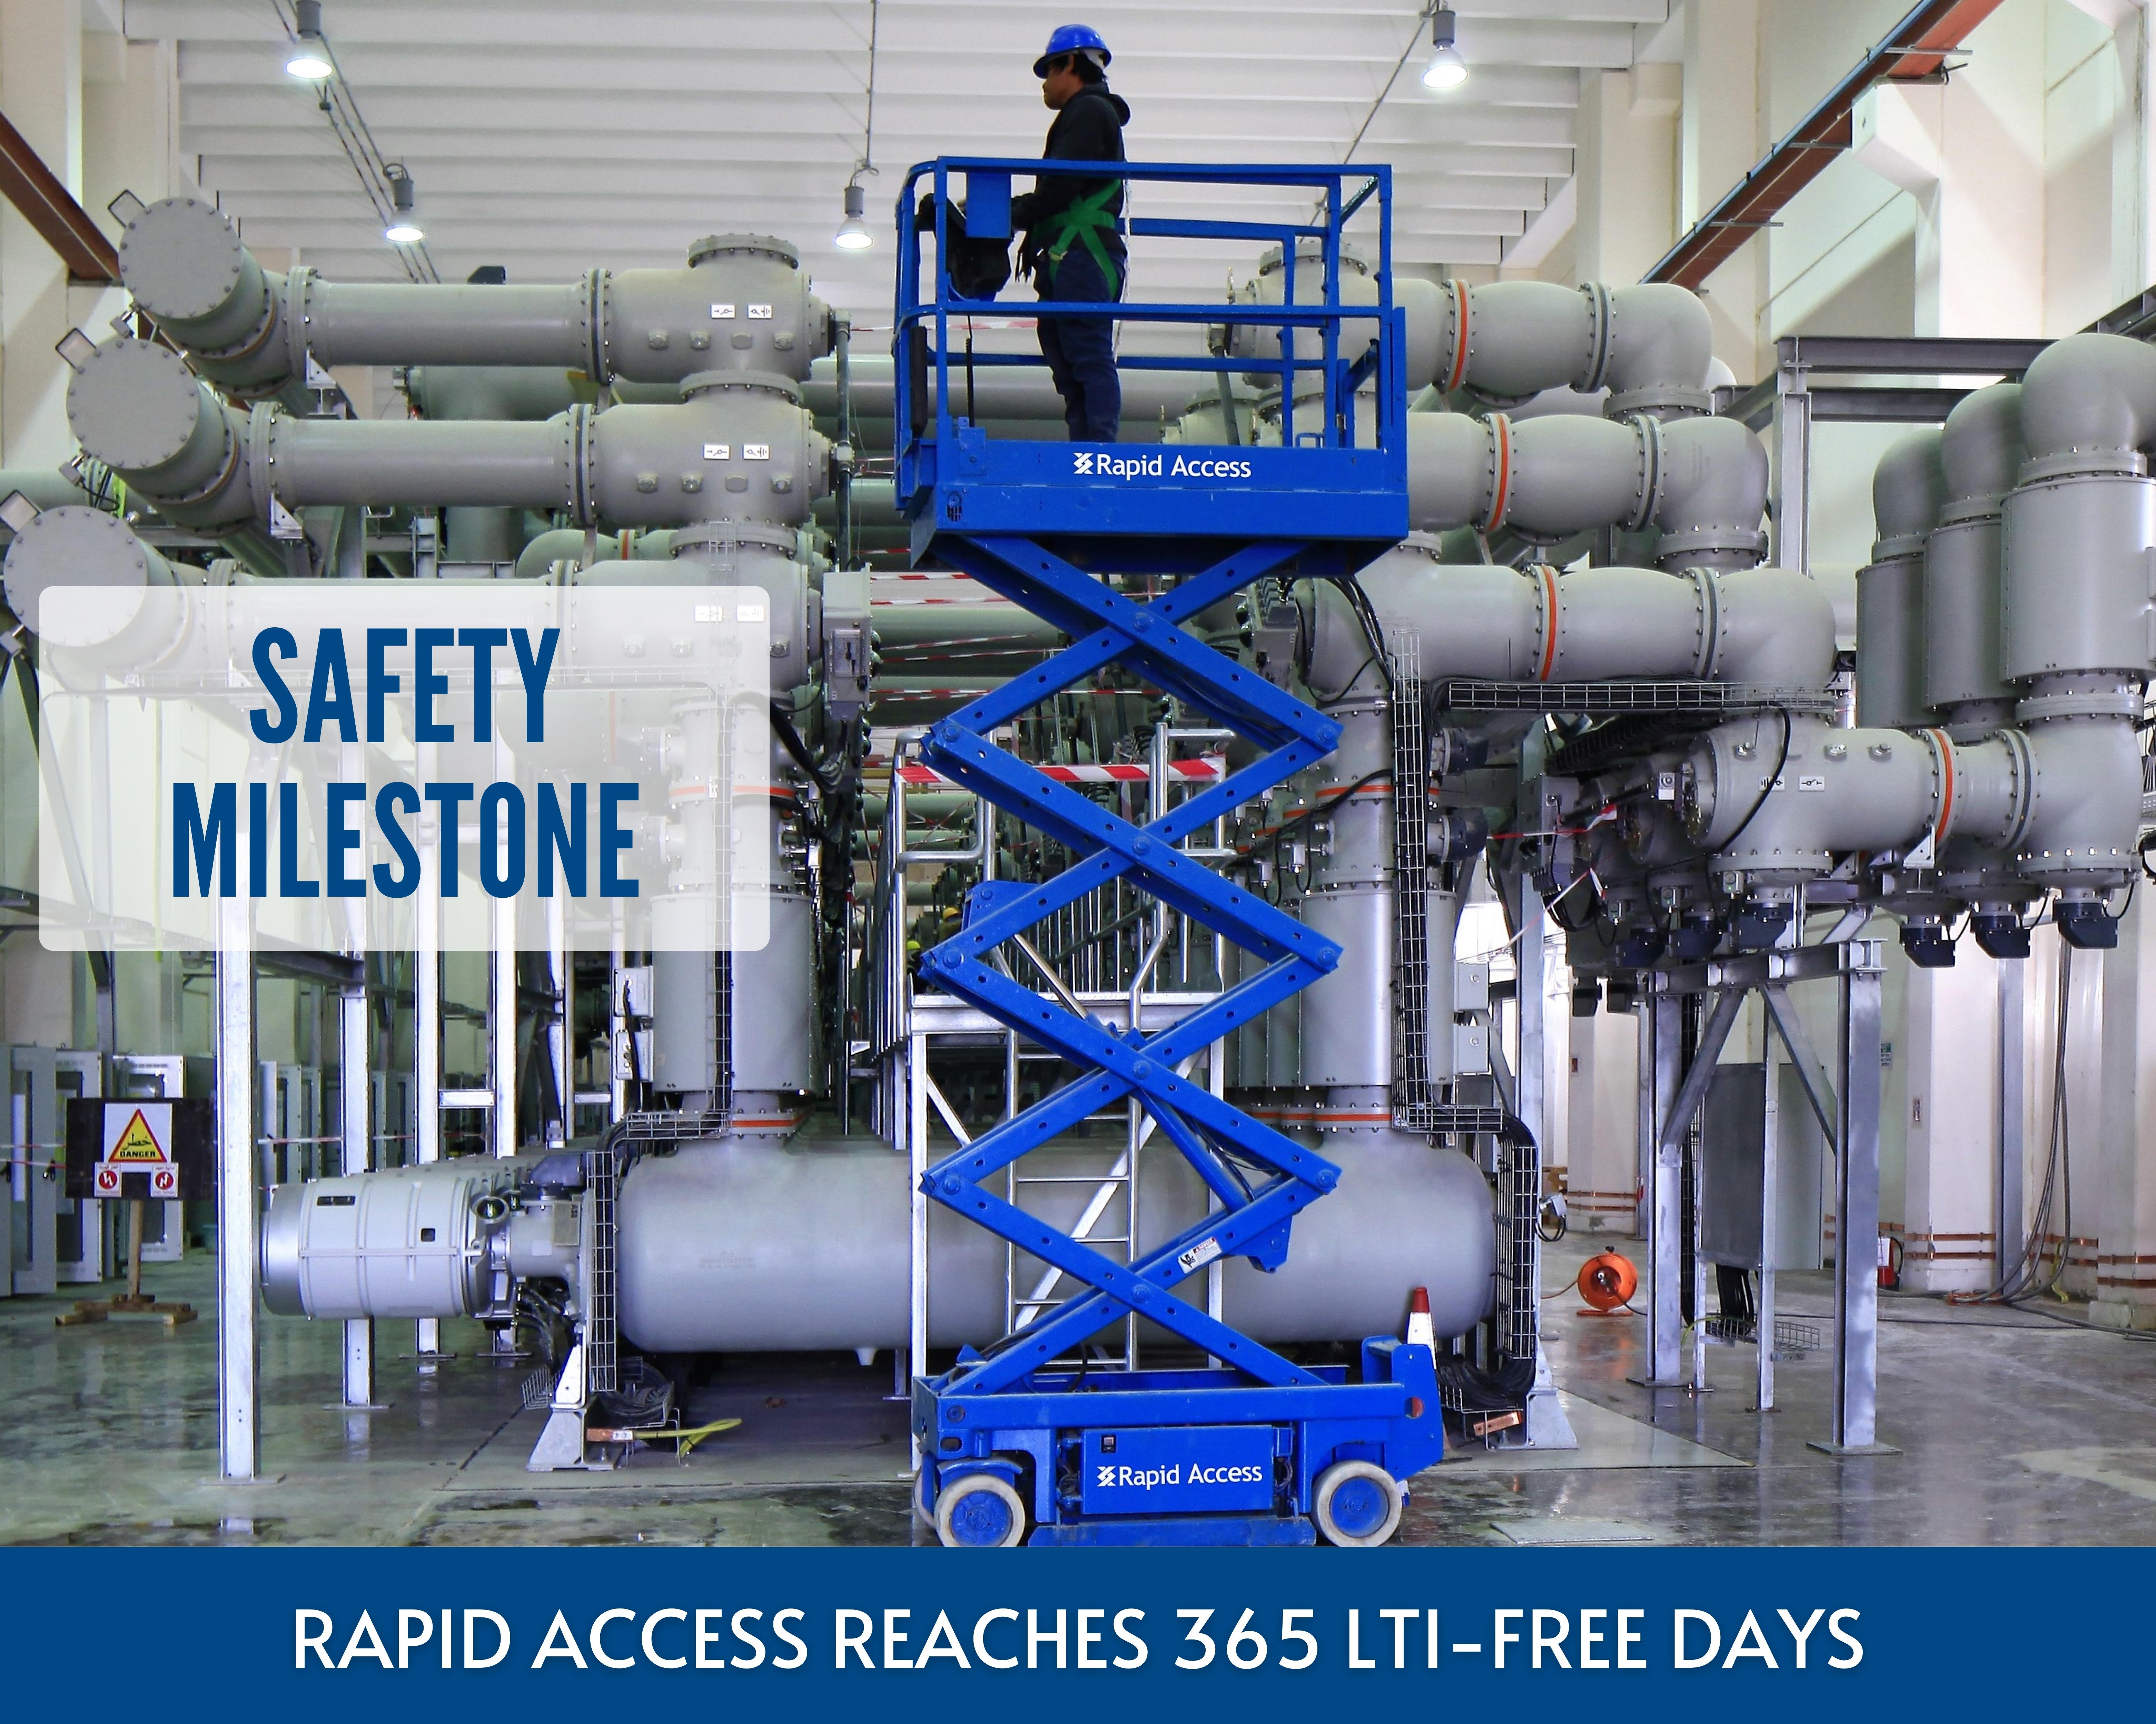 Rapid Access is celebrating One Year without a Lost-Time Injury